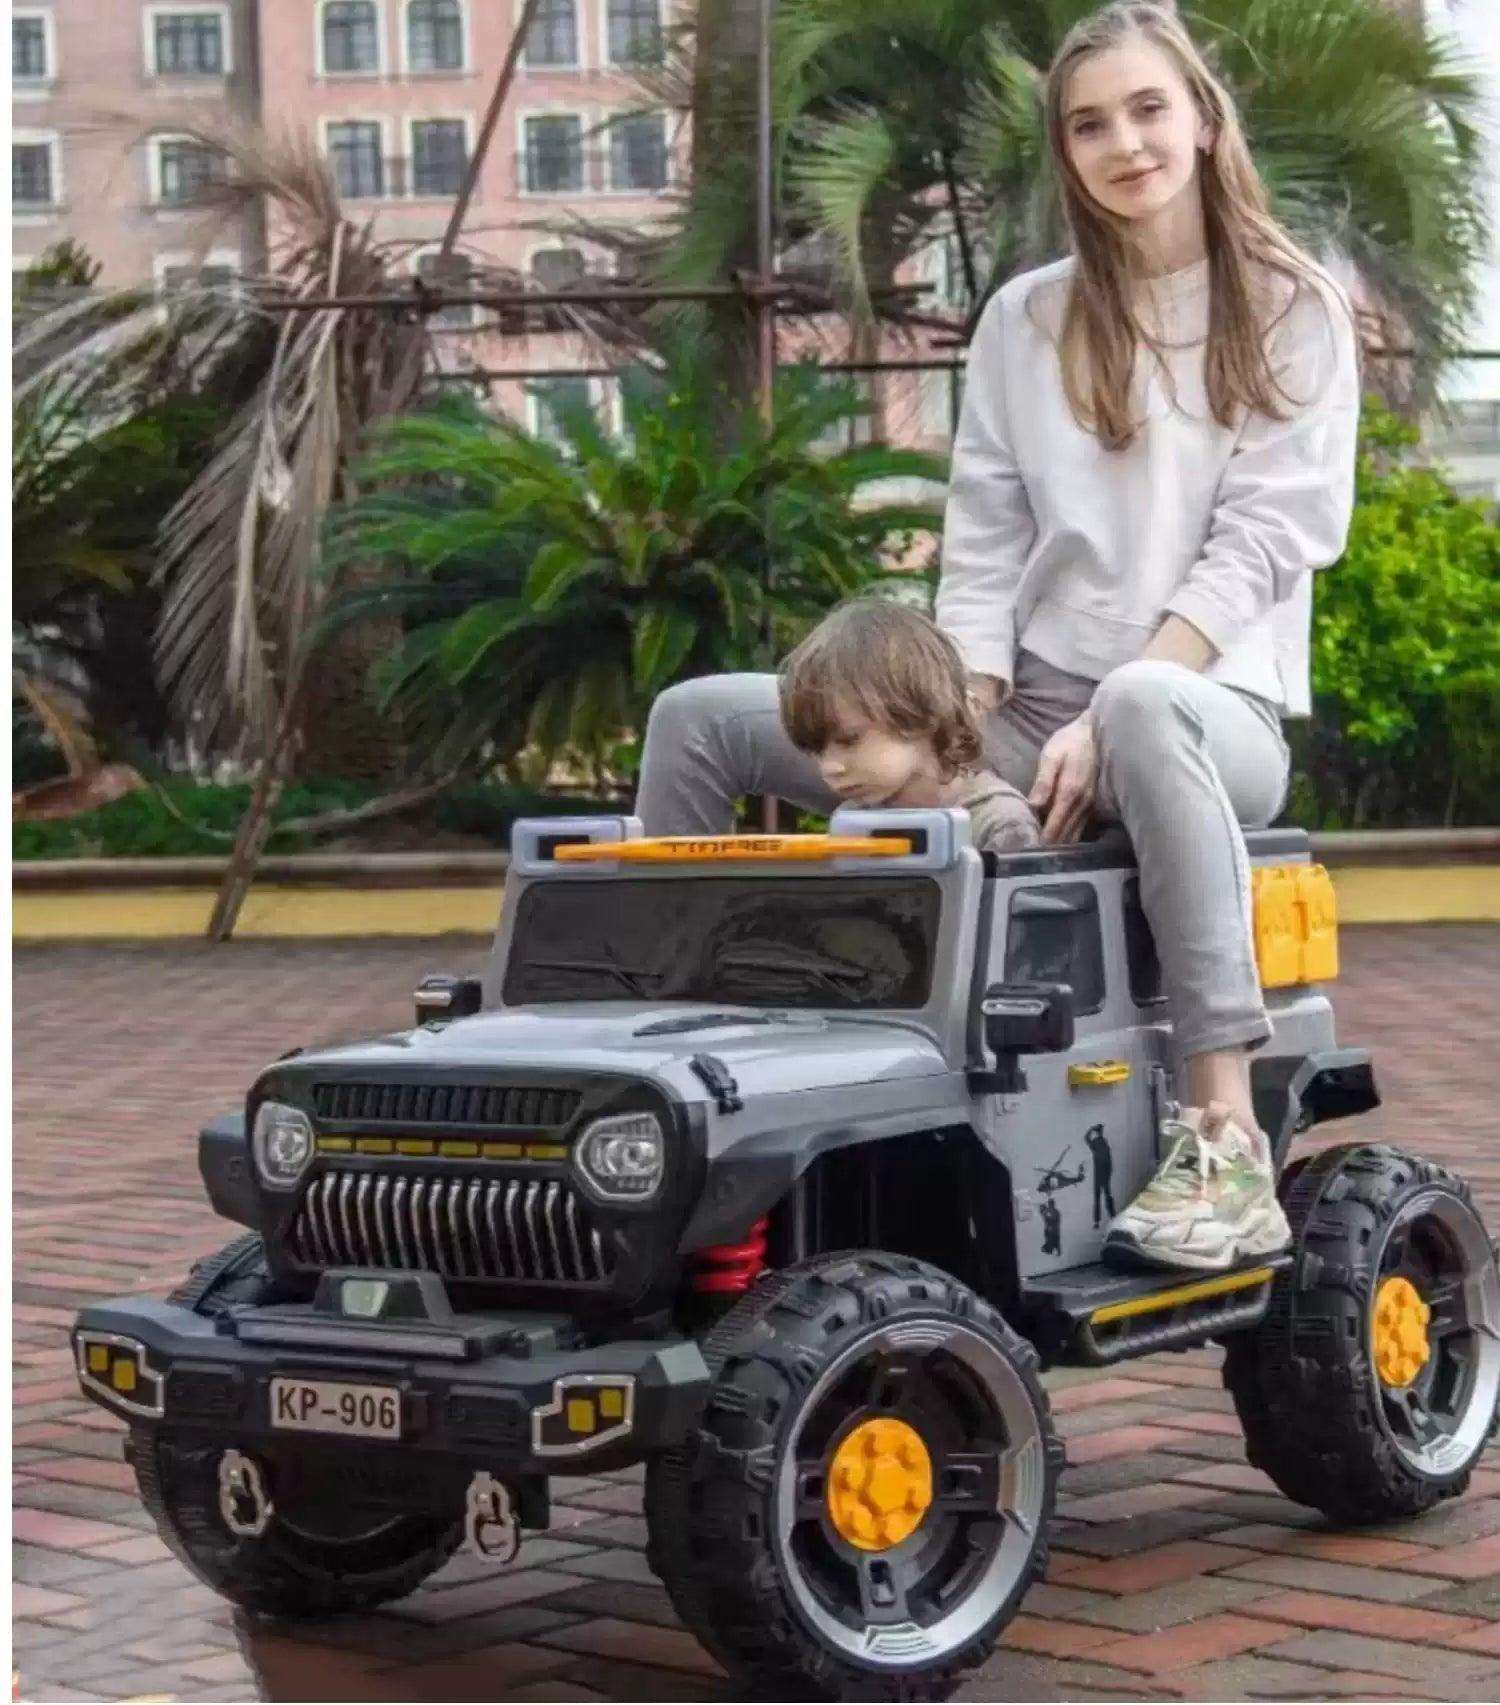 PATOYS | 12V 4 Wheel Drive 2 Seater Electric Battery Operated Ride on Jeep Truck for Kids Up to 8 Years KP906 (Colour May Vary) Ride on Jeep PATOYS